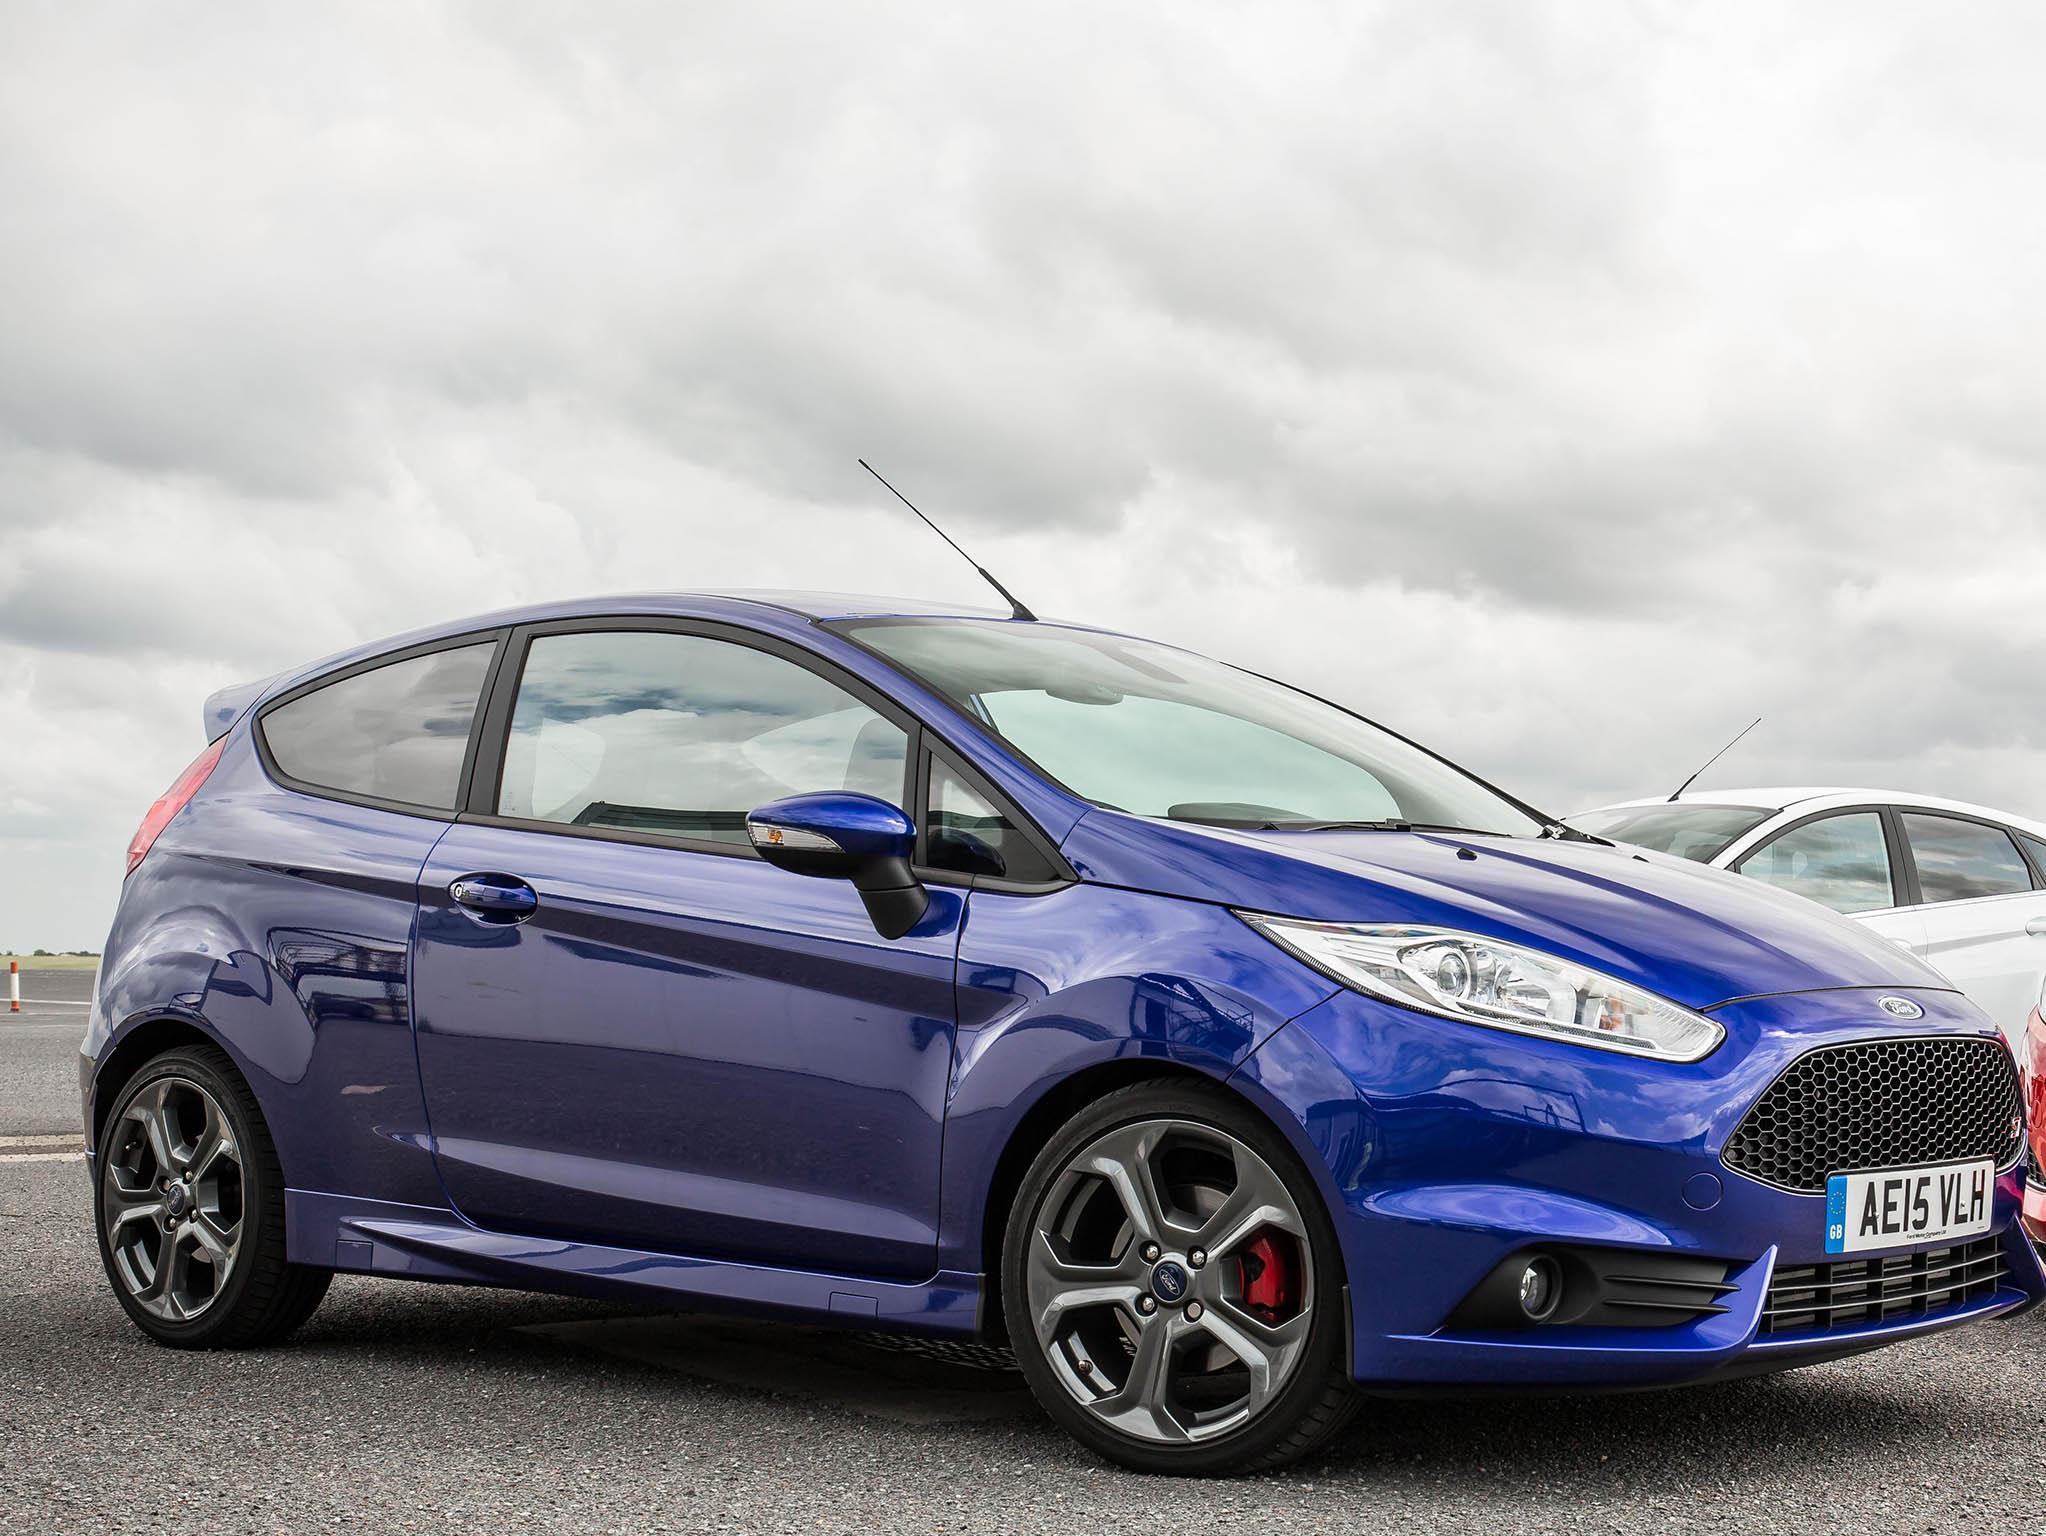 The Ford Fiesta is both fast and economical